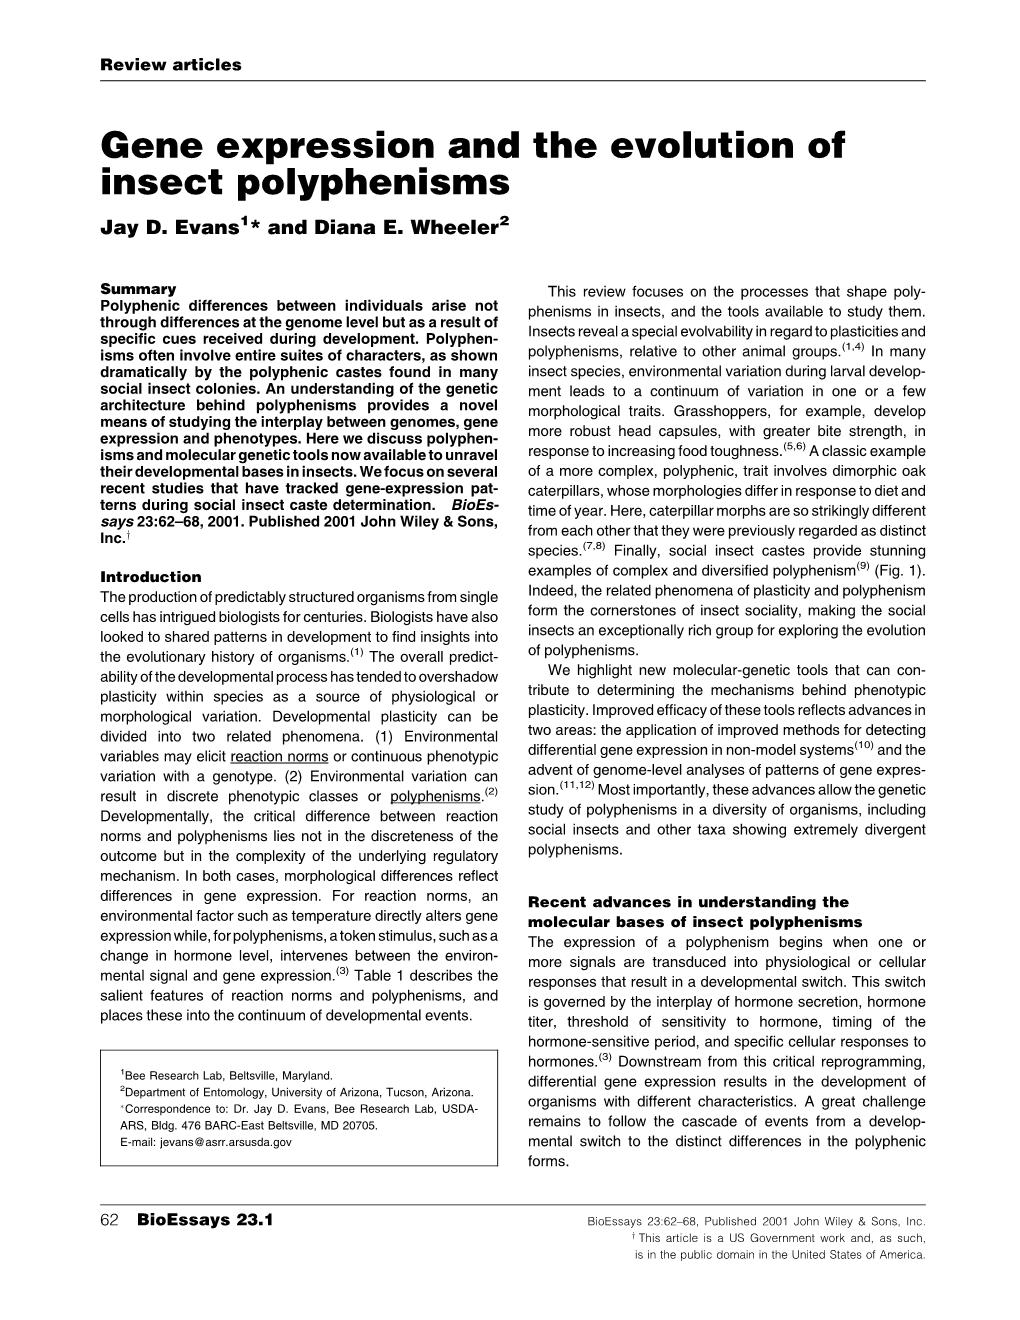 Gene Expression and the Evolution of Insect Polyphenisms